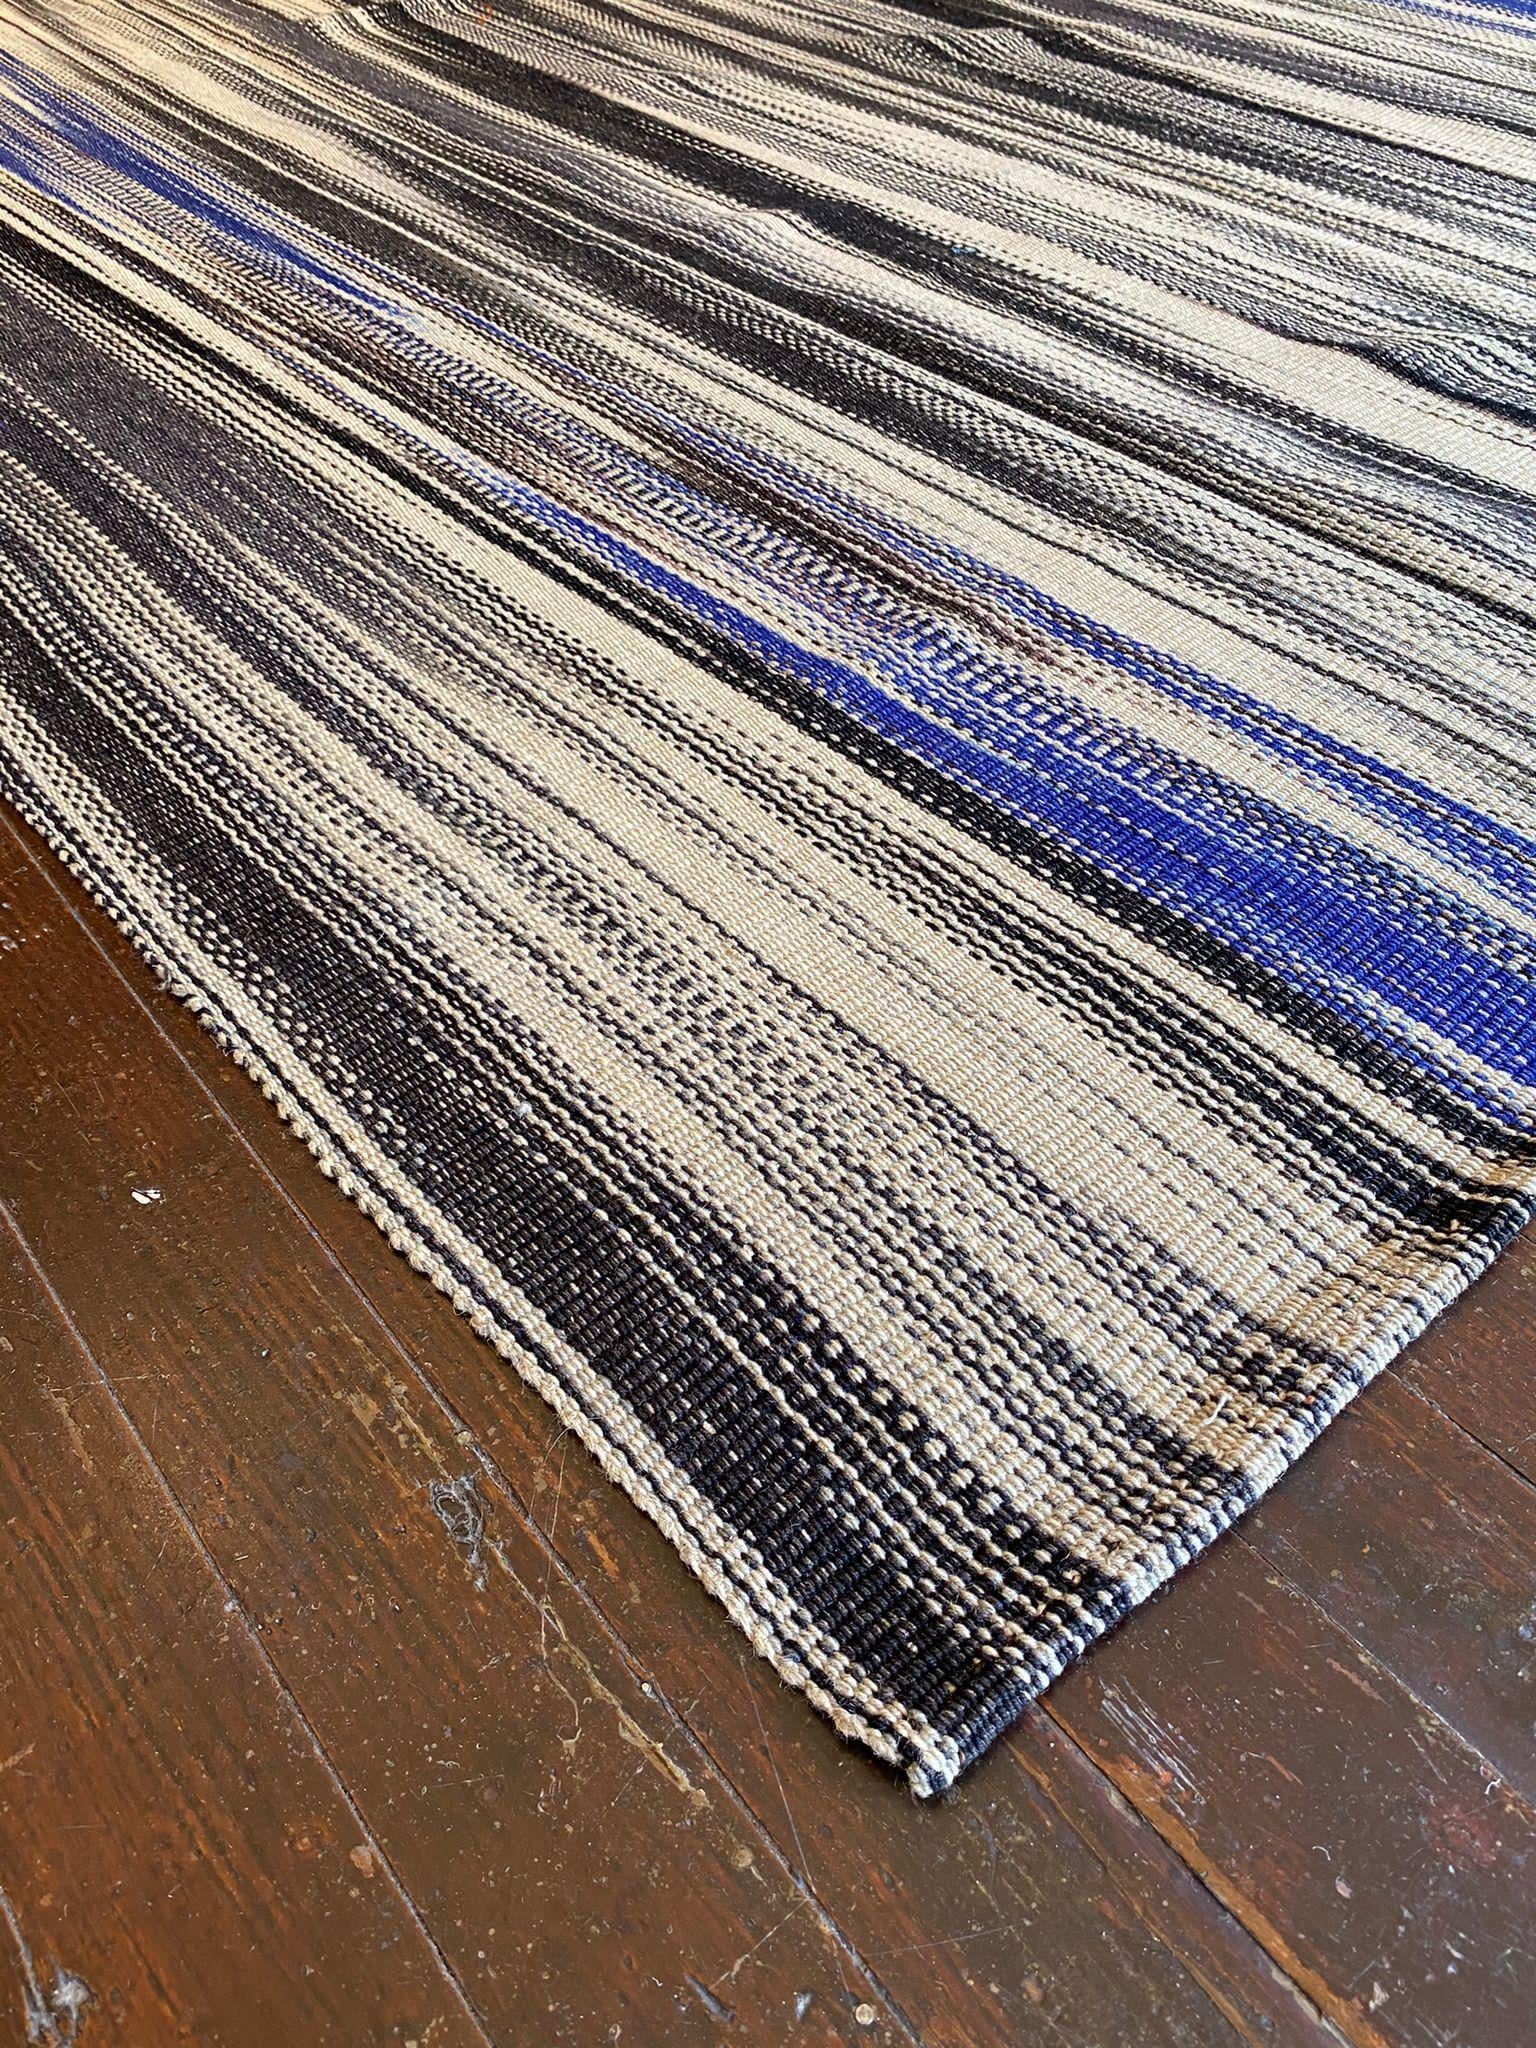 Vintage Fars Kelim rugs are renowned for their intricate designs, exquisite craftsmanship, and vibrant colors. The mirage of blue, beige, grey, and black hues used in these rugs creates a visual feast for the eyes, capturing the attention of any